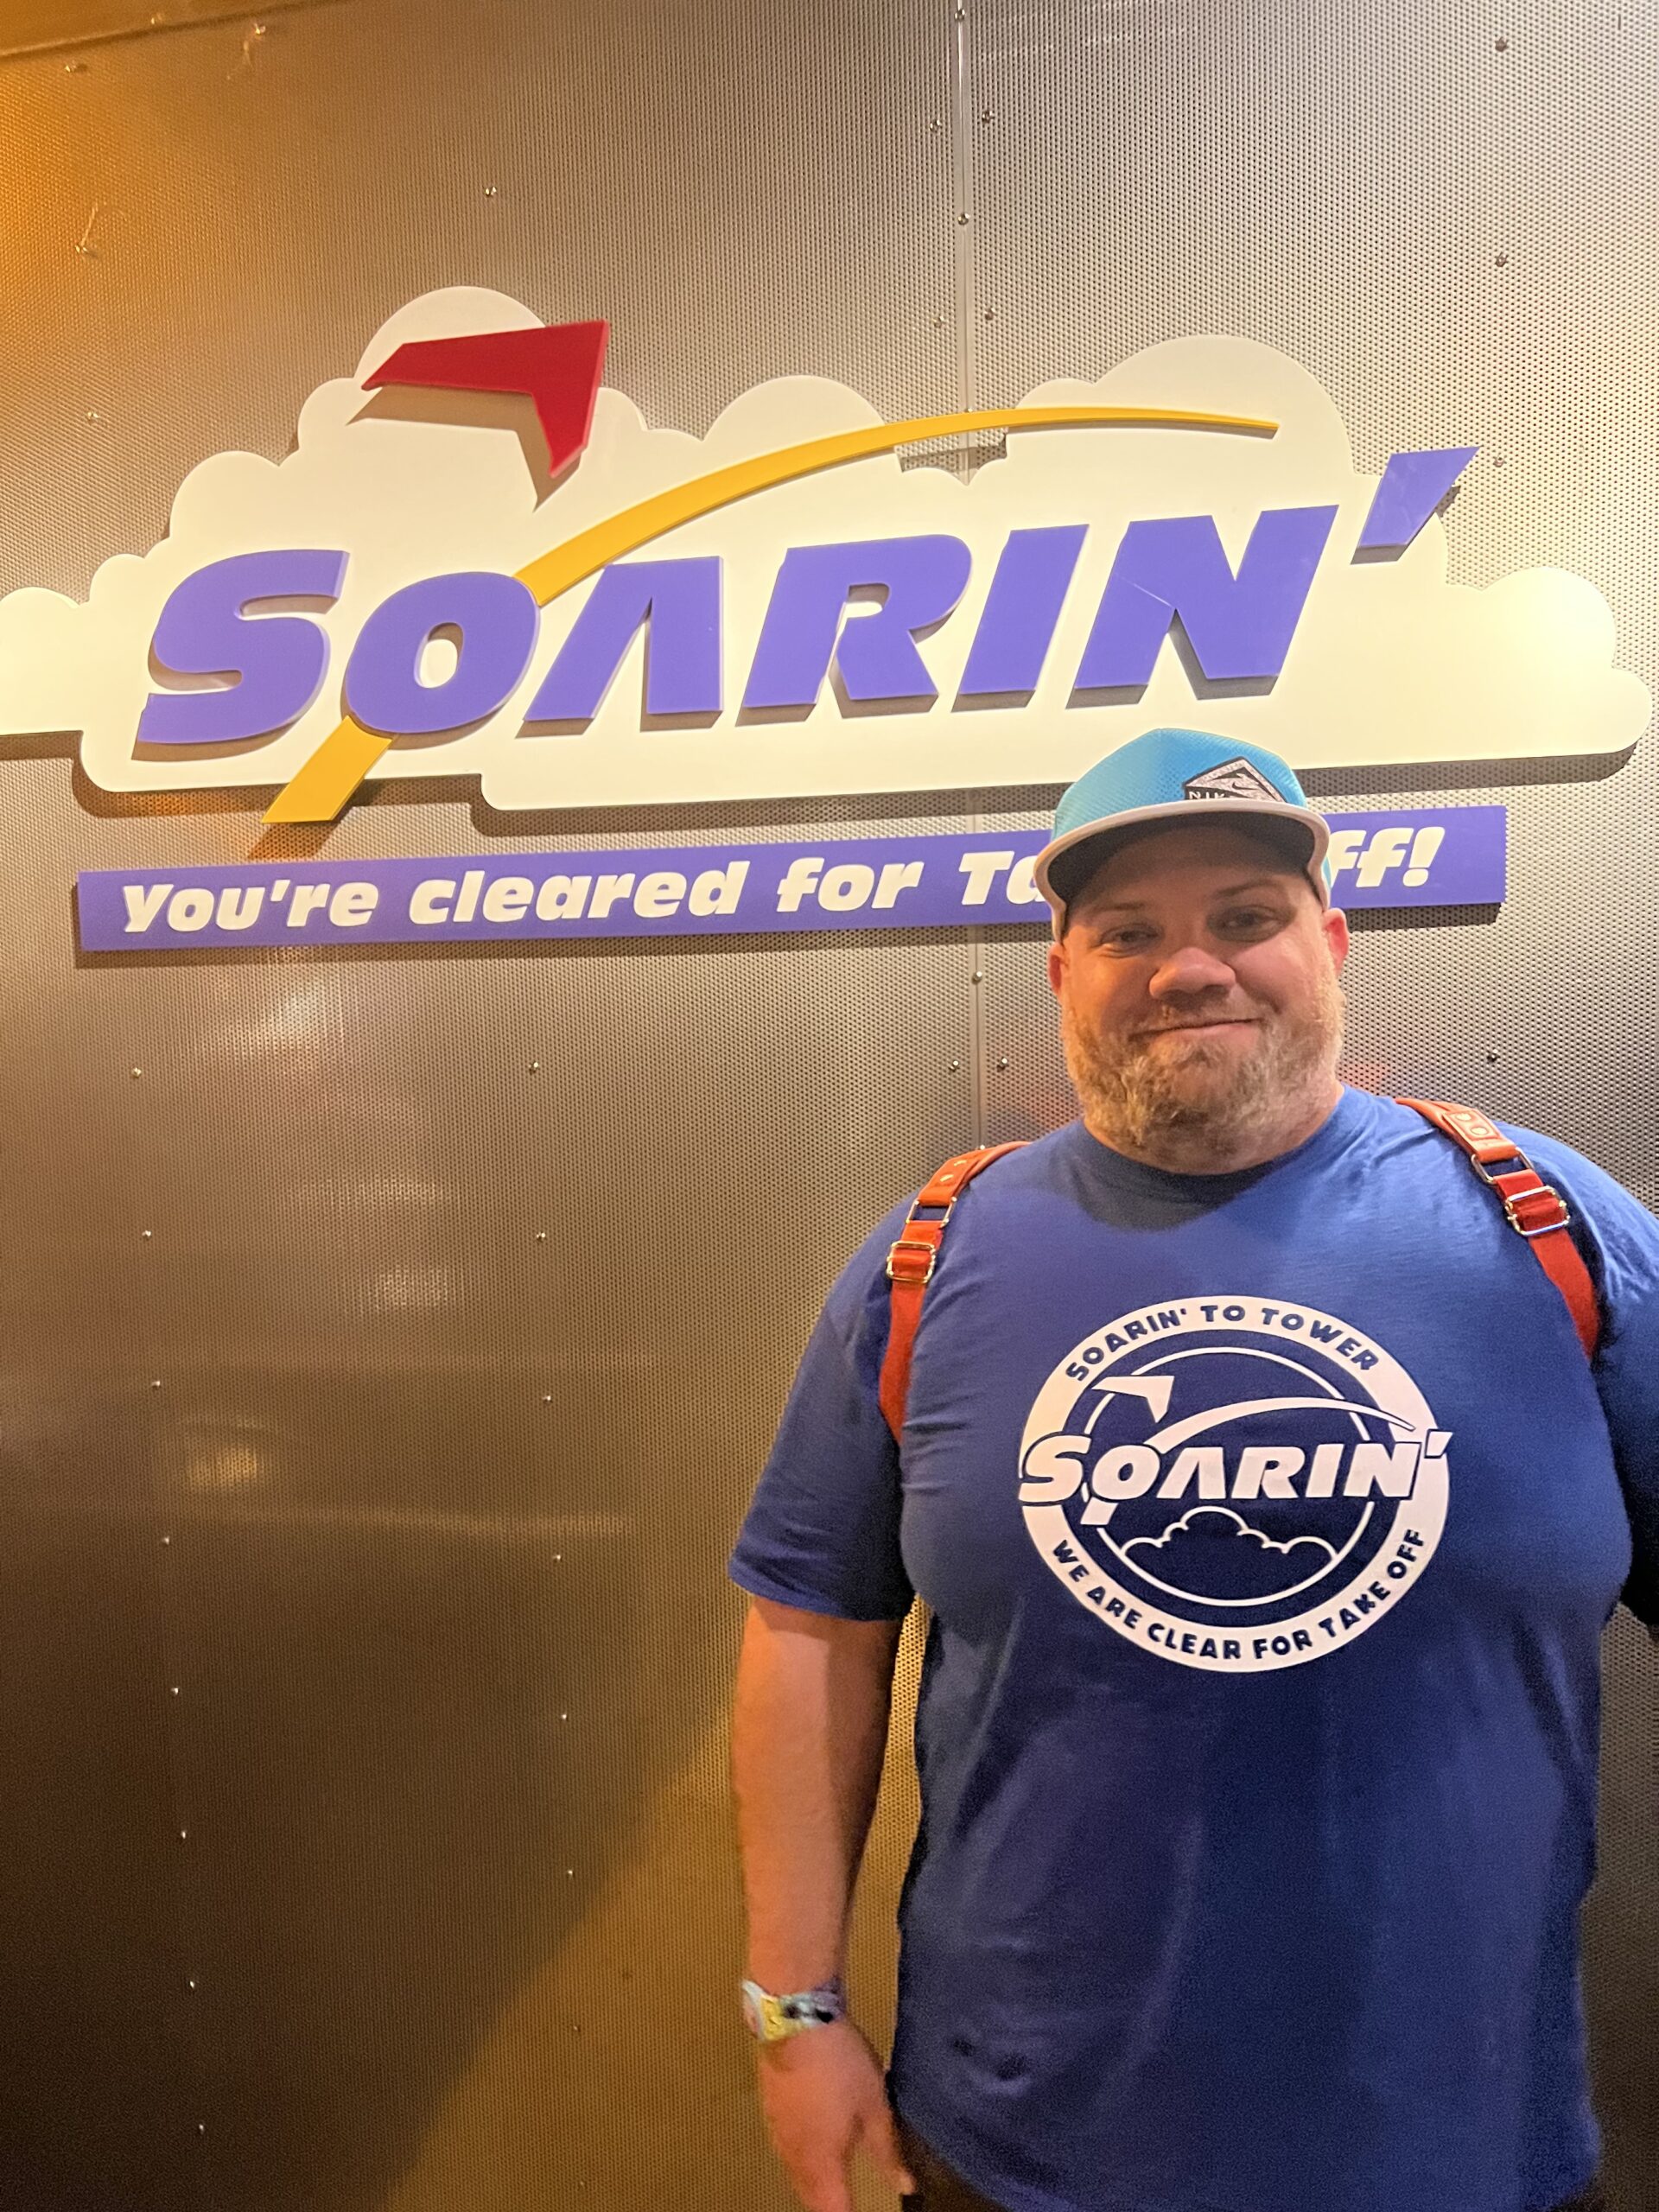 Beans is stood under the Soarin' sign in the queue, wearing a Soarin' T-Shirt